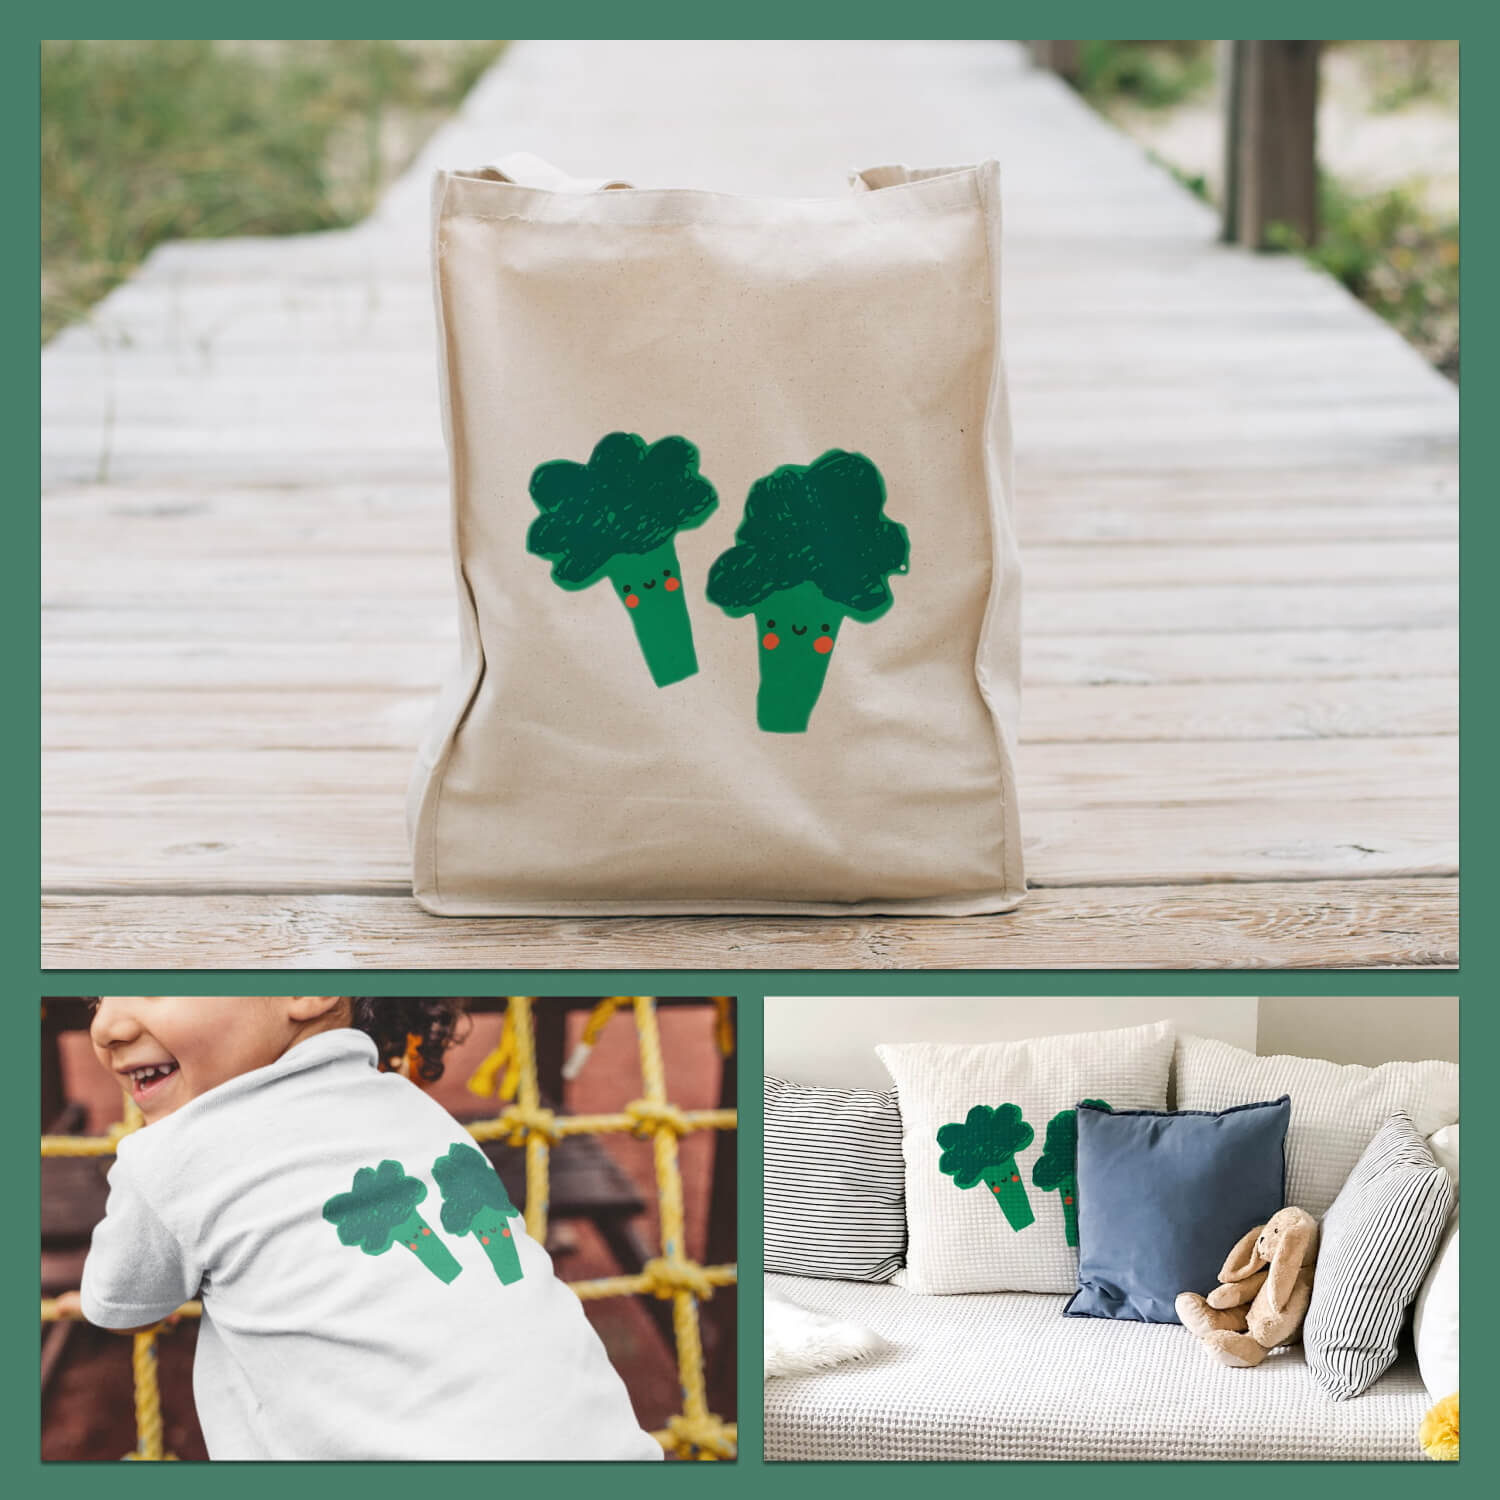 Images of cheerful broccoli on a bag, on a sweater and on a pillow.